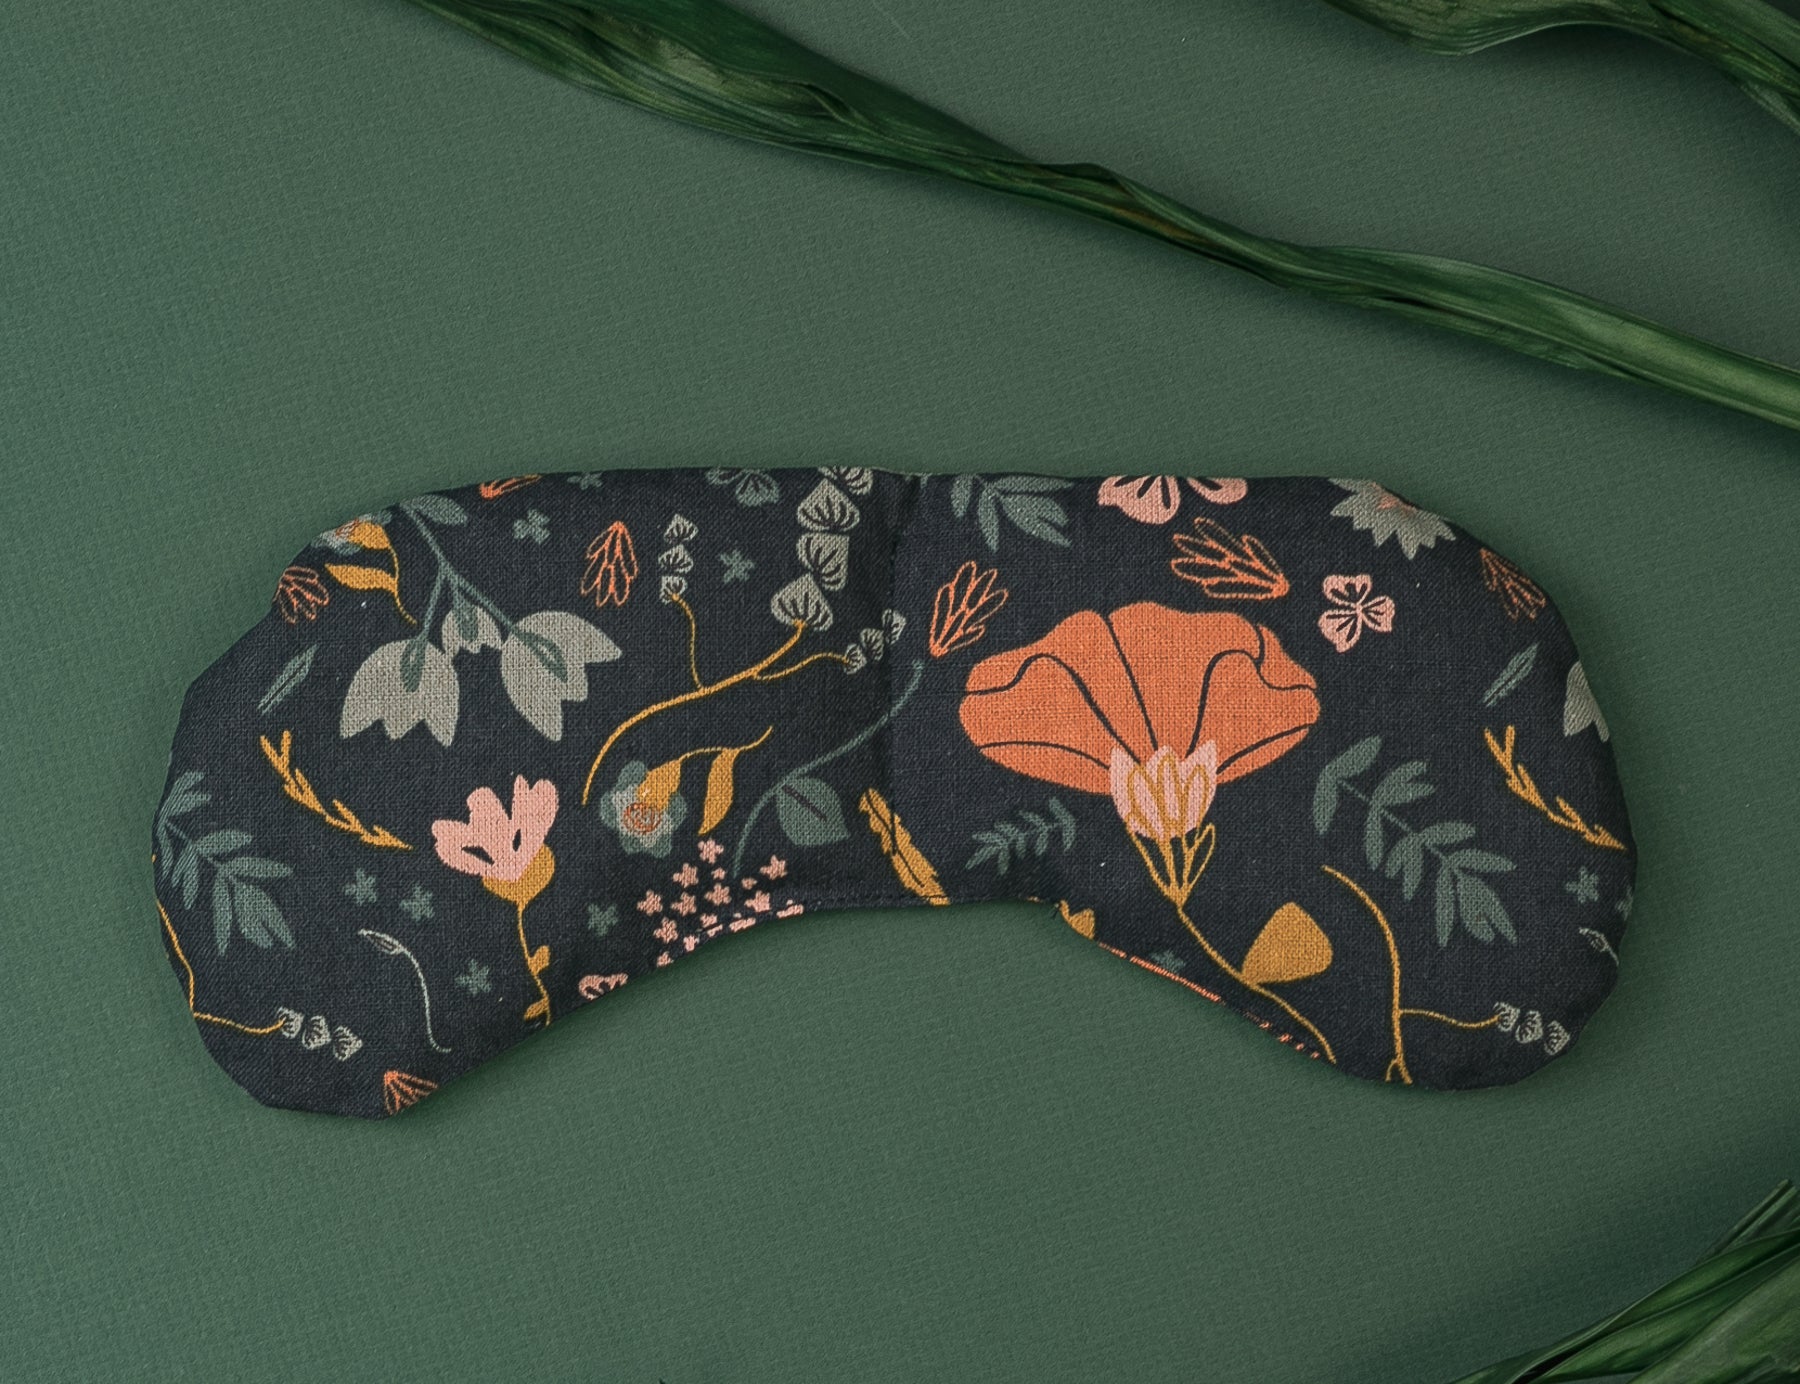 Migraine Mask by Slow North. Strap free cotton weighted eye pillow to be used hot or cold to sooth headaches and tired eyes. Navy with multicolor floral design. Dark green leaves on dark green background.